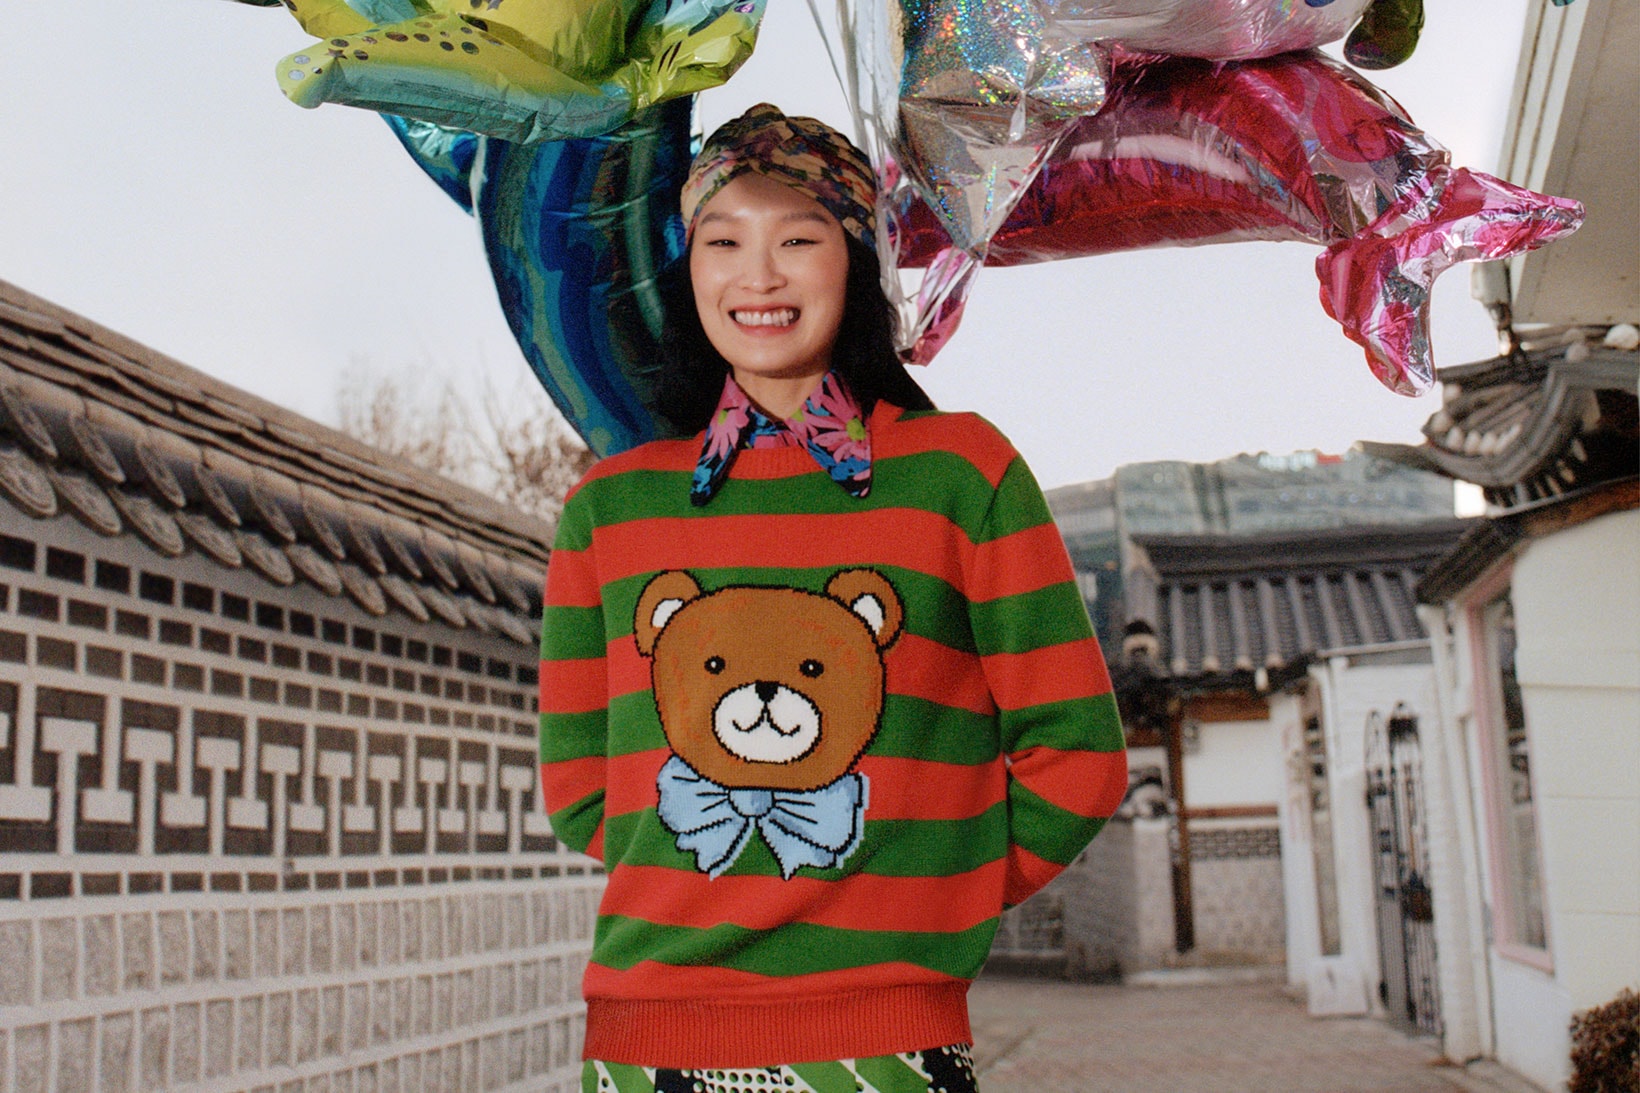 gucci kai collaboration capsule collection teddy bears striped shirt balloons